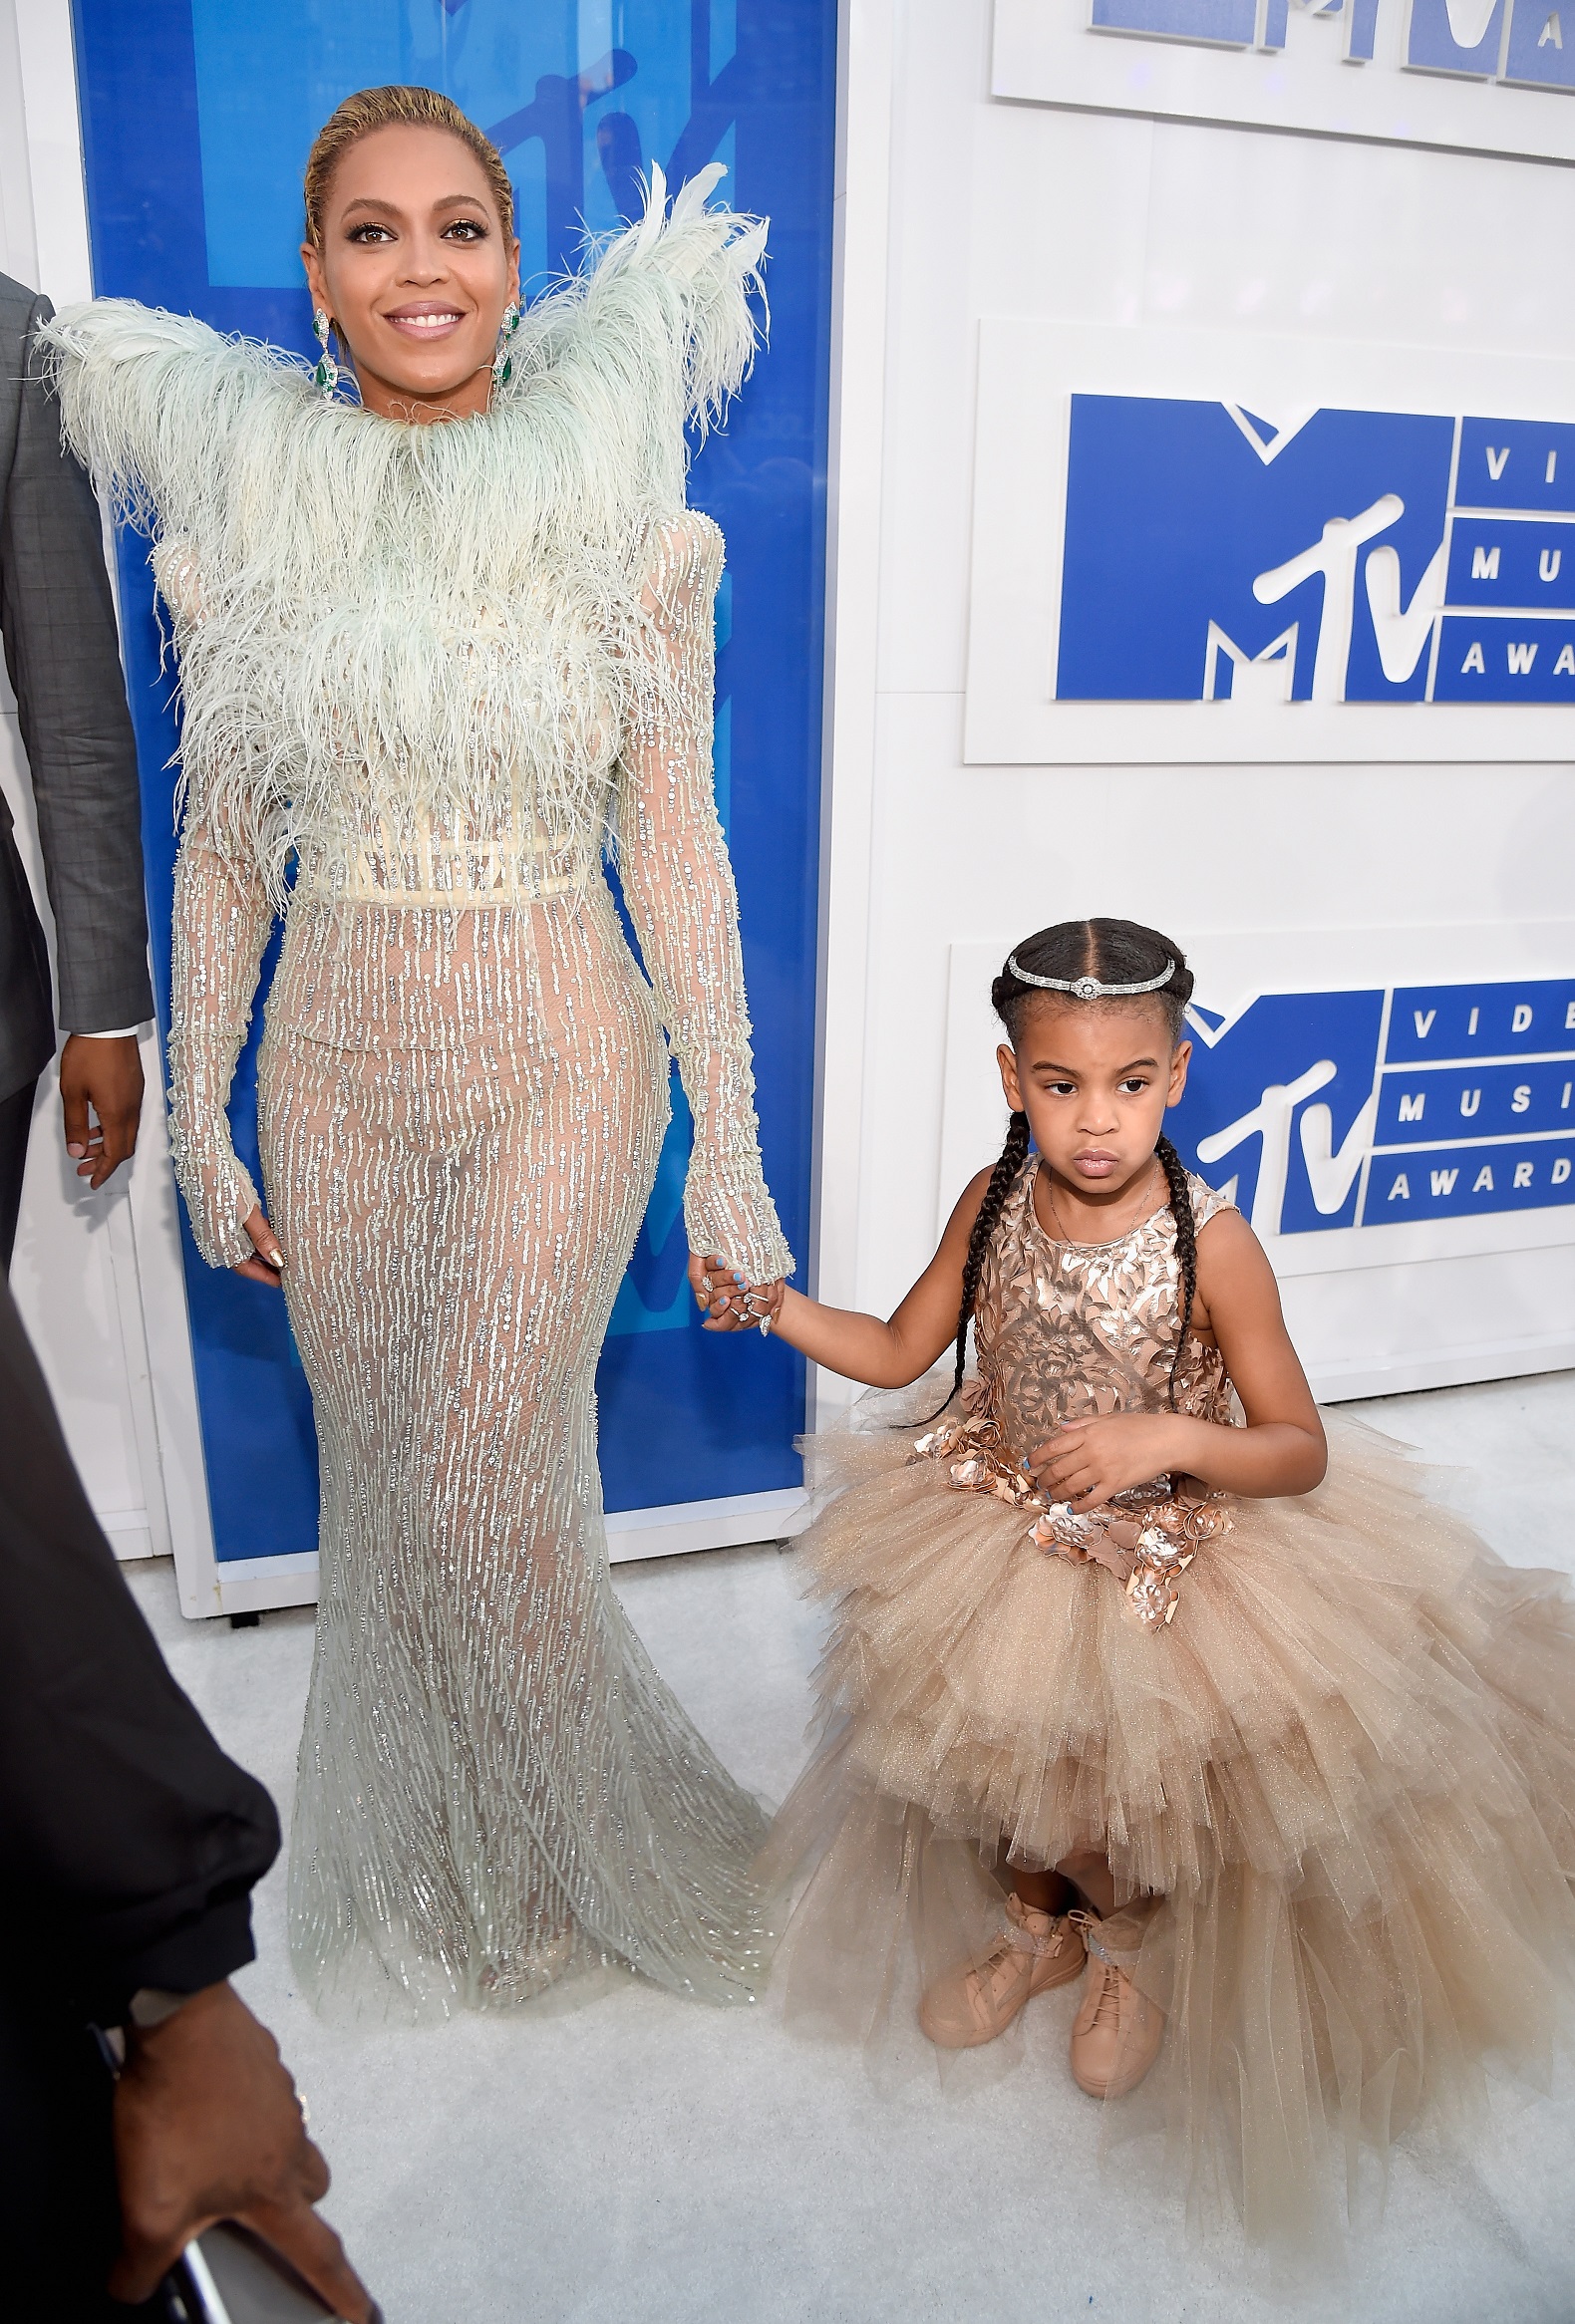 NEW YORK, NY - AUGUST 28: Singer Beyonce and Blue Ivy Carter attends the 2016 MTV Video Music Awards at Madison Square Garden on August 28, 2016 in New York City. (Photo by Kevin Mazur/WireImage)